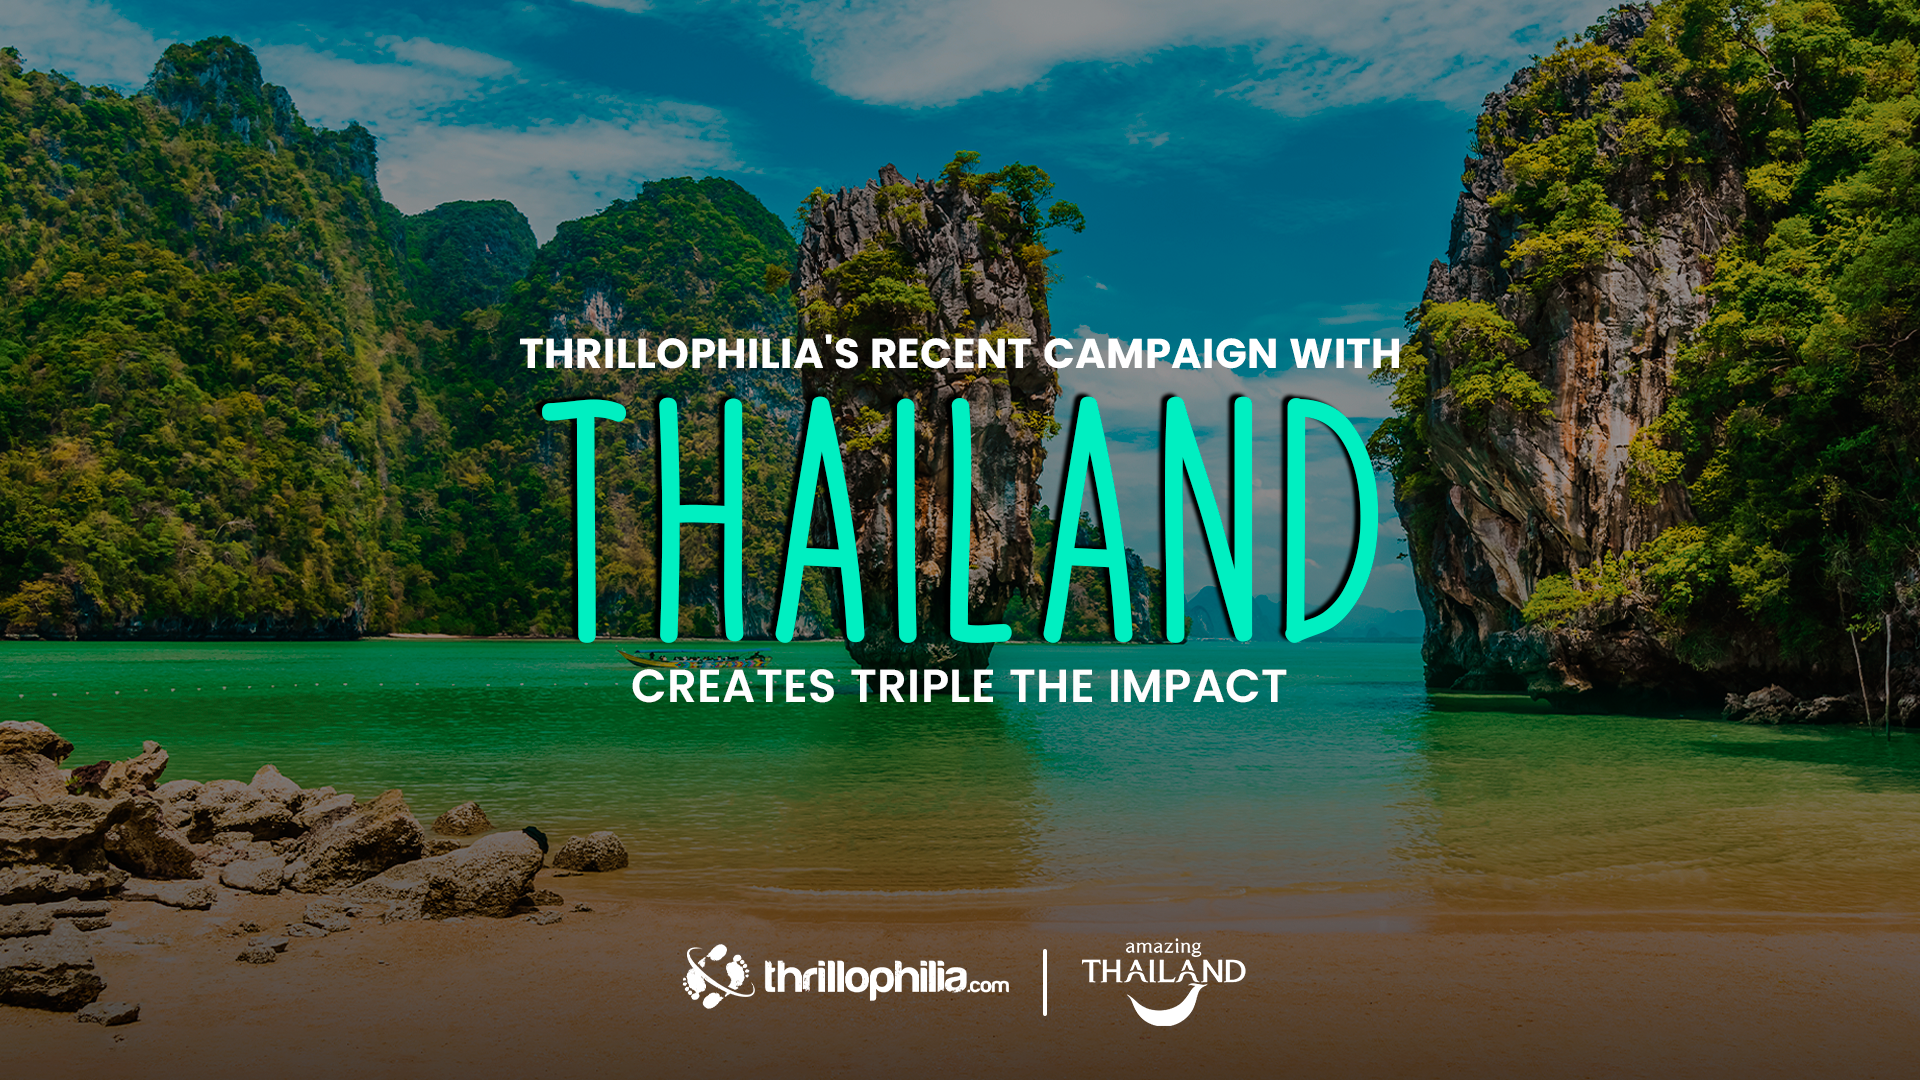 Thrillophilia's recent Campaign with Thailand creates Triple the Impact